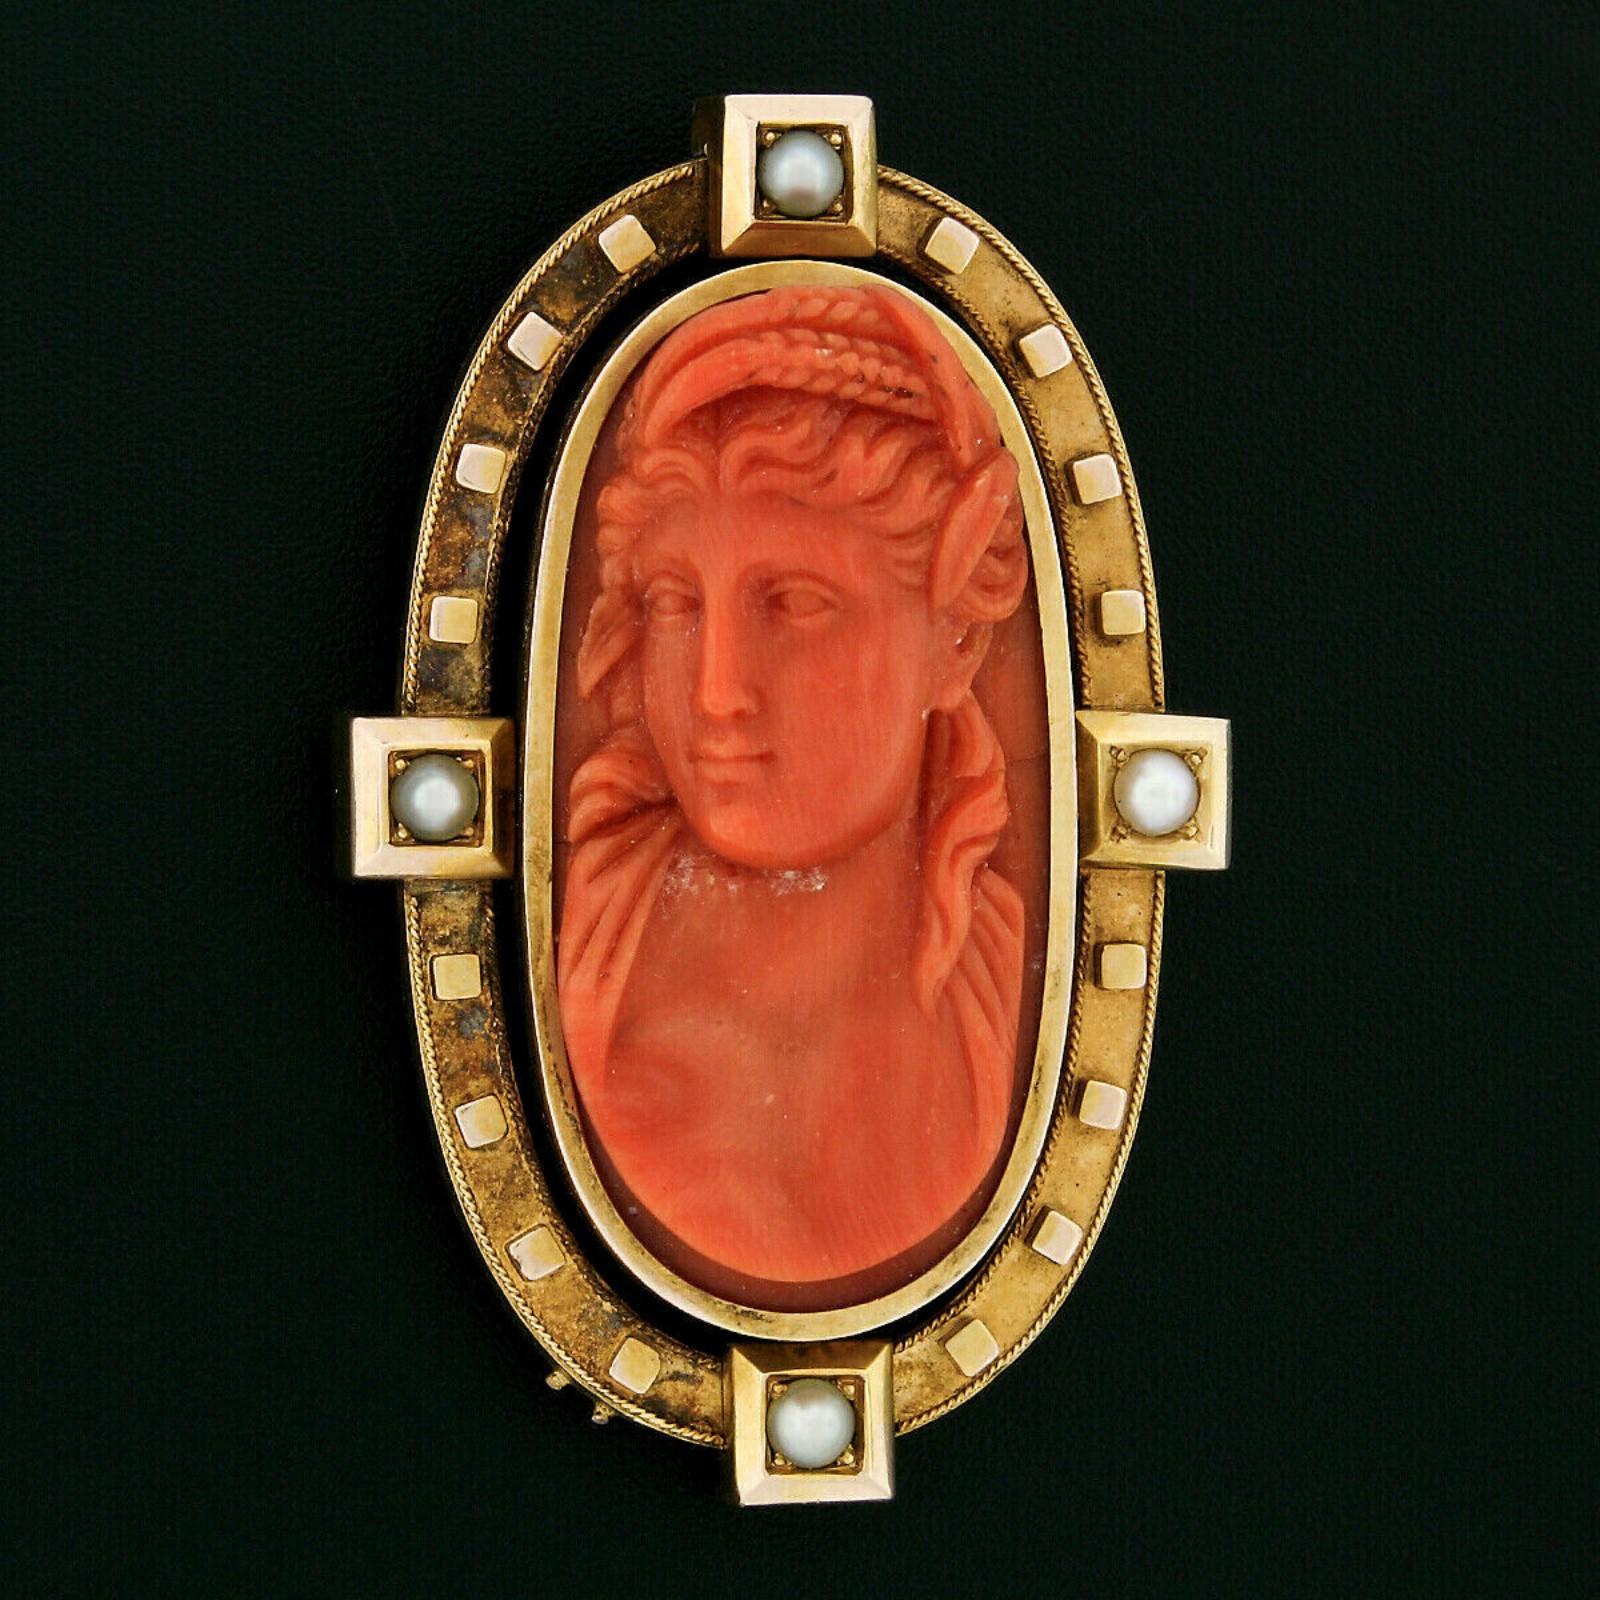 Here we have an antique brooch with an enhancer hook that was crafted from solid 18k yellow gold during the Victorian era. The brooch features a magnificent piece of natural coral that is bezel set at its center. The elongated oval coral is a deep,